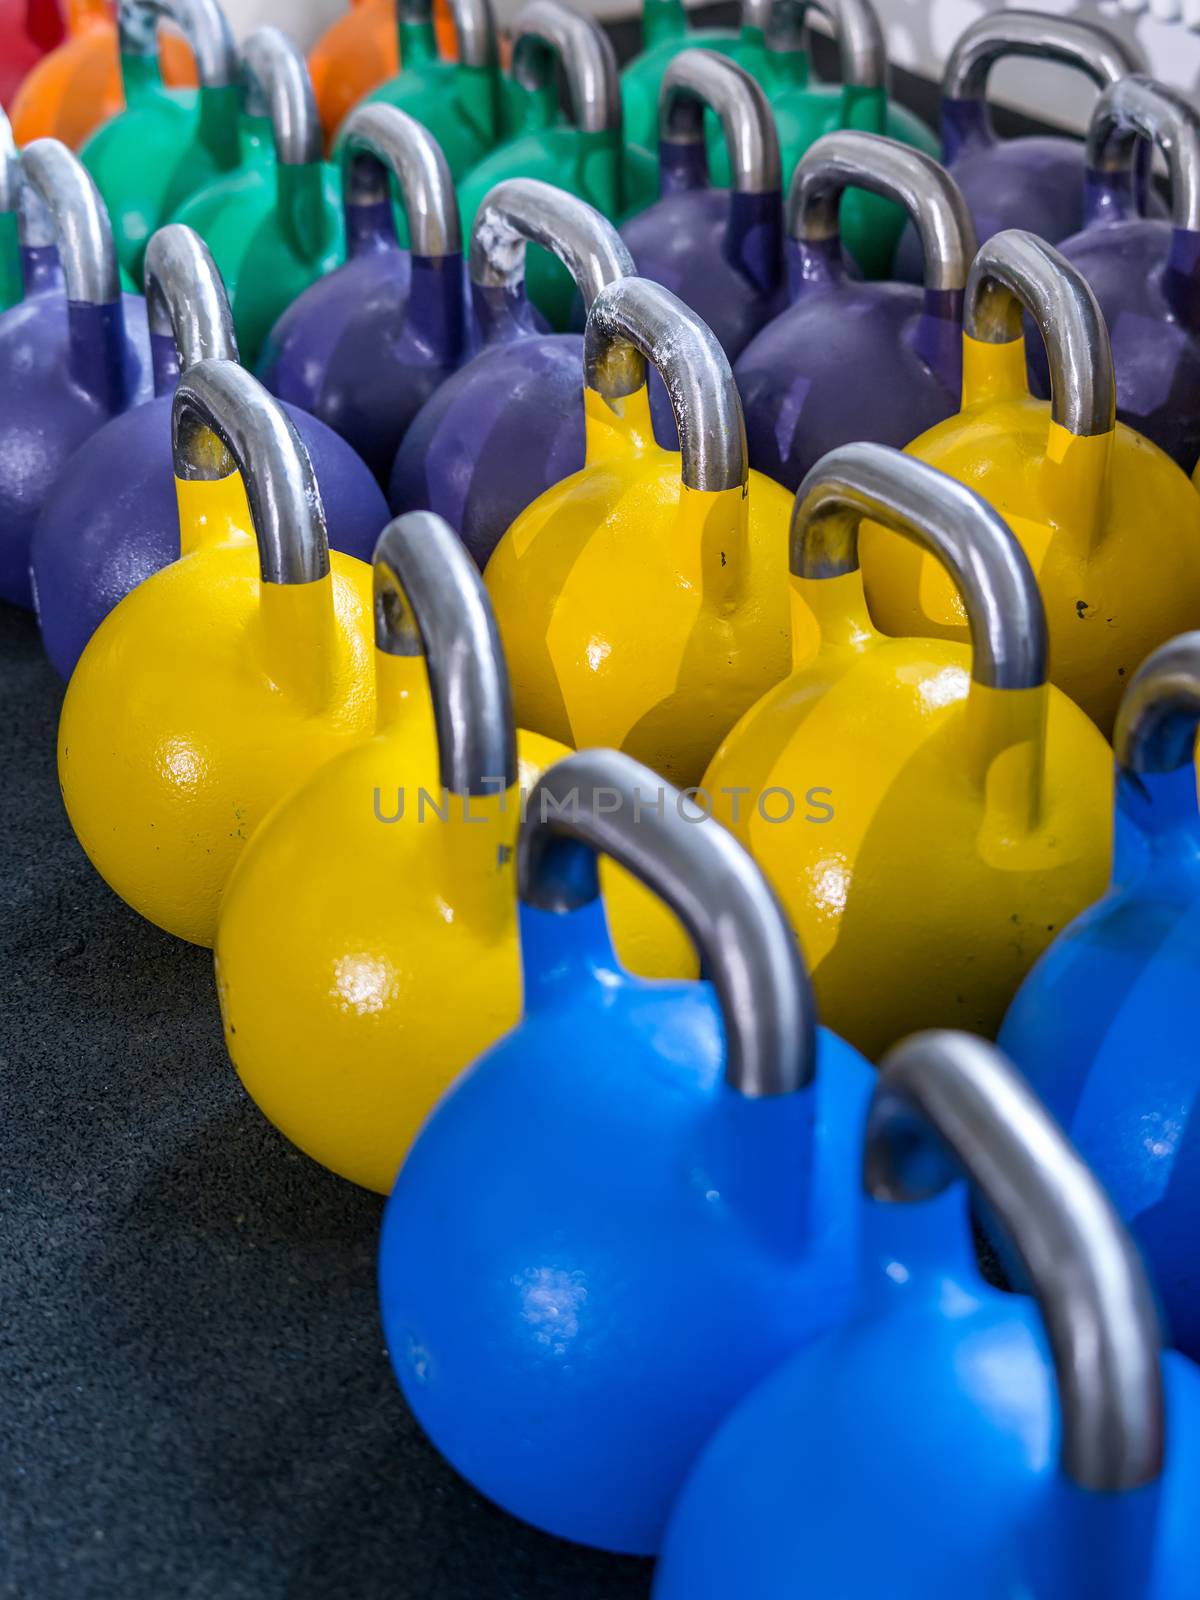 Kettlebells at a crossfit gym by sumners